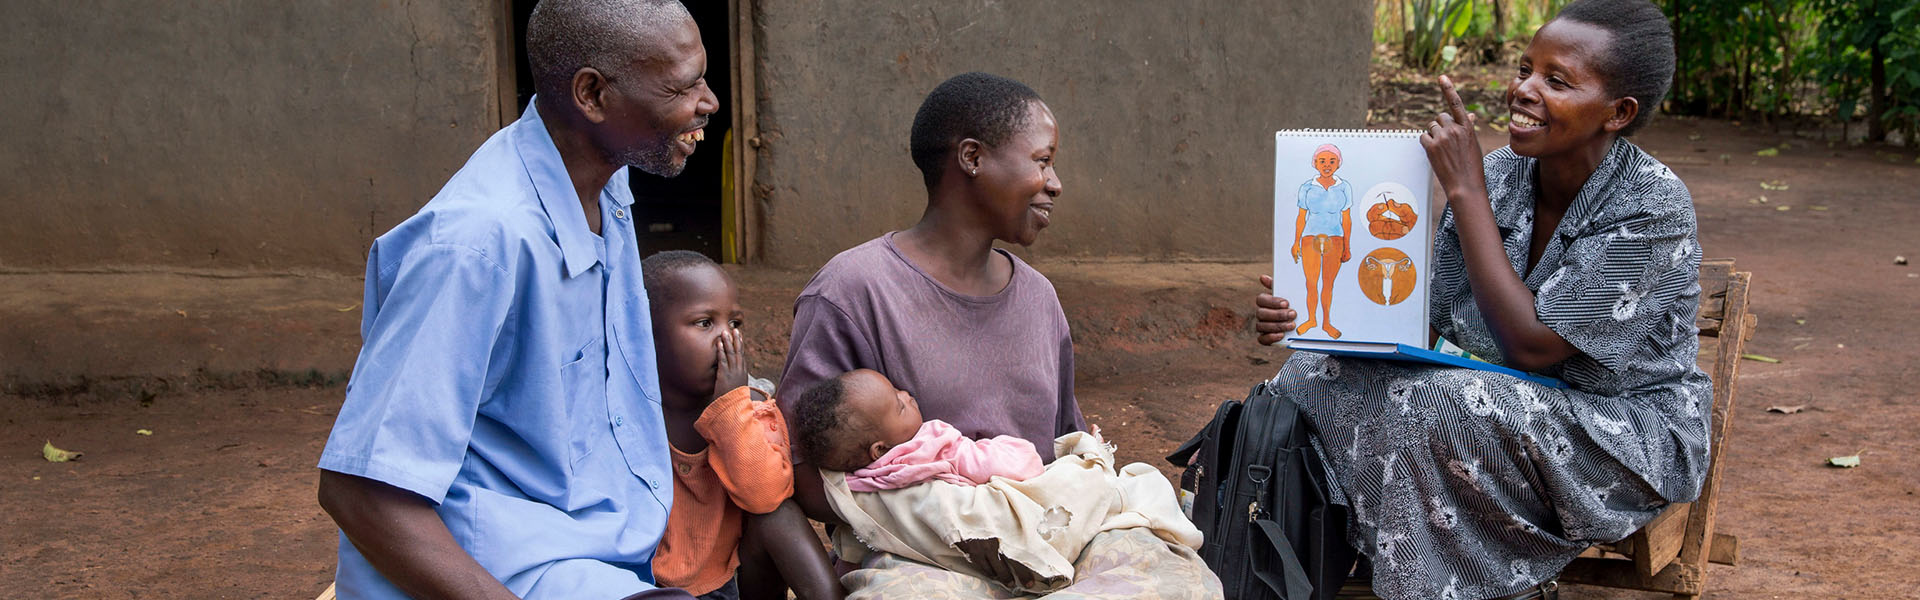 Family seated on ground outside of a home discussing family planning.